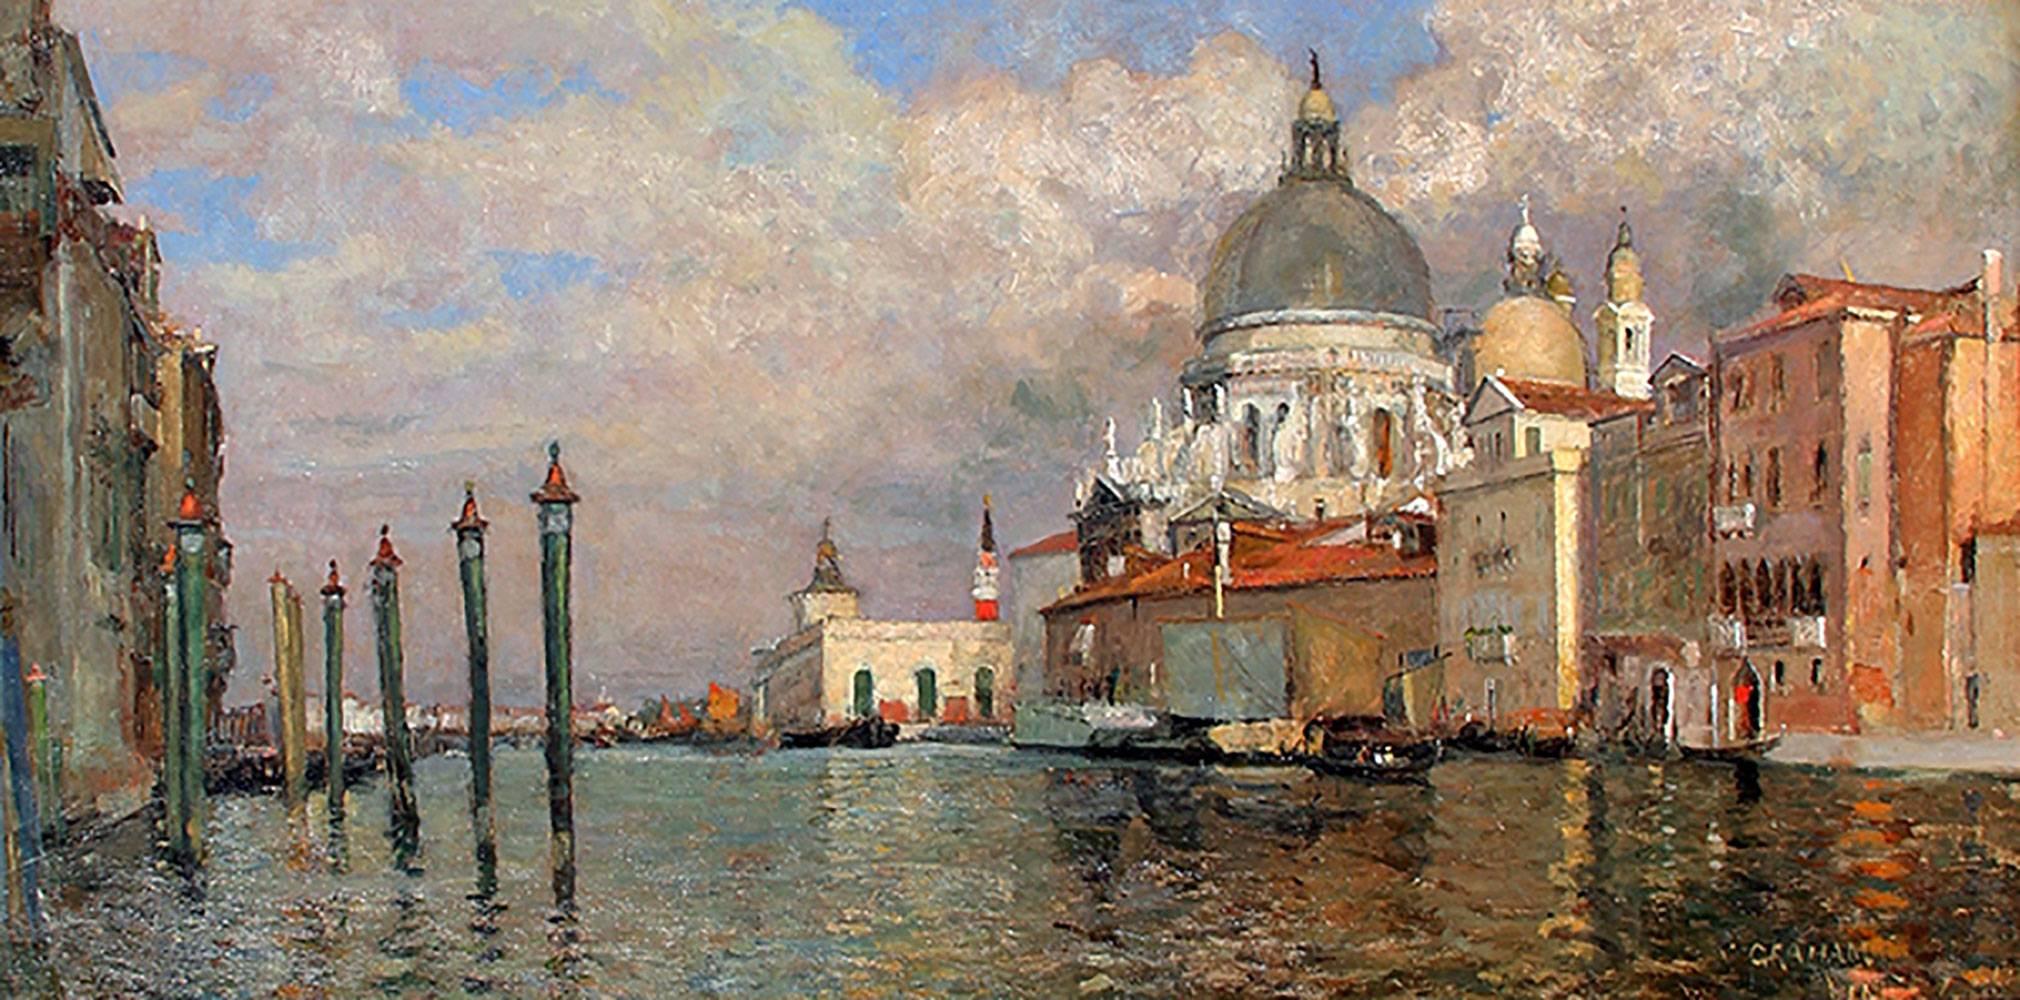 William Graham Landscape Painting - Dogana and Salute from the Prefetura, Venice, Oil on Canvas, 1886